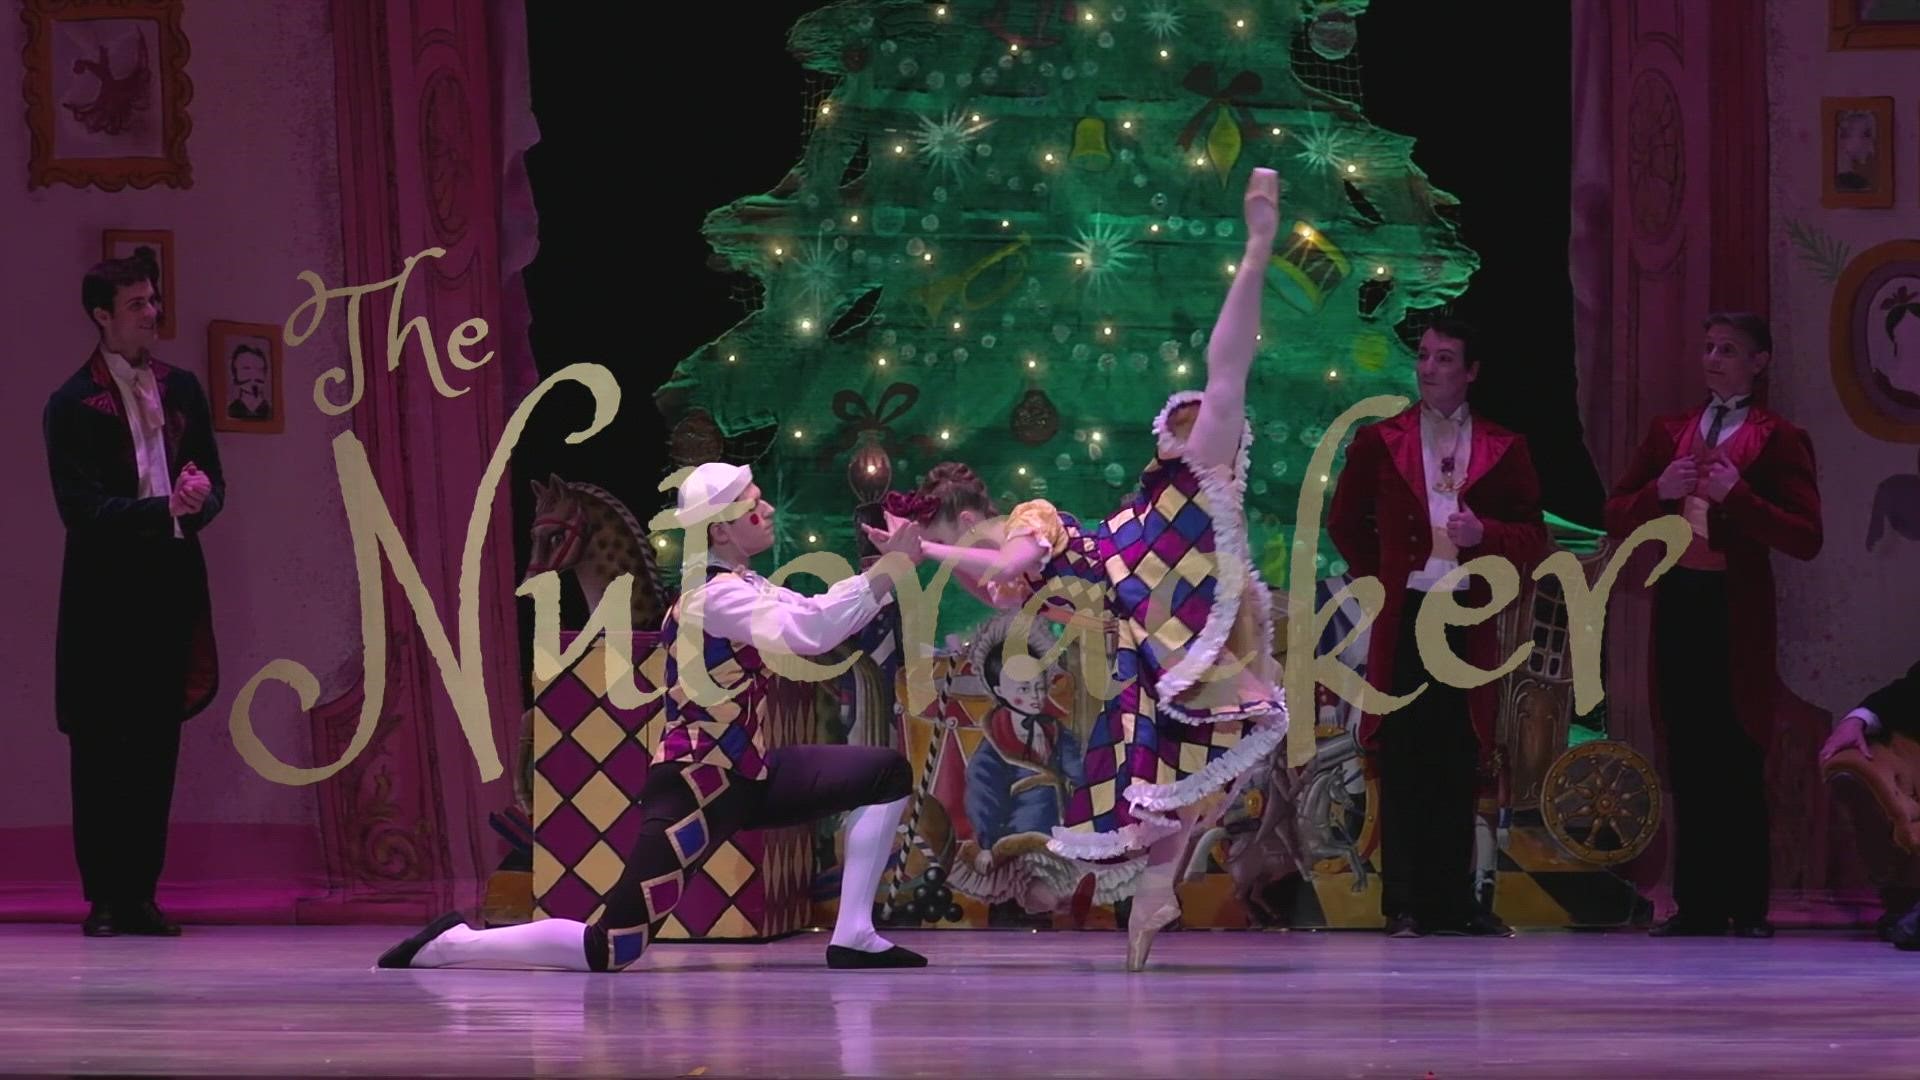 Two (2) winners will receive a pair of tickets to see the holiday production at Touhill Preforming Arts Center.